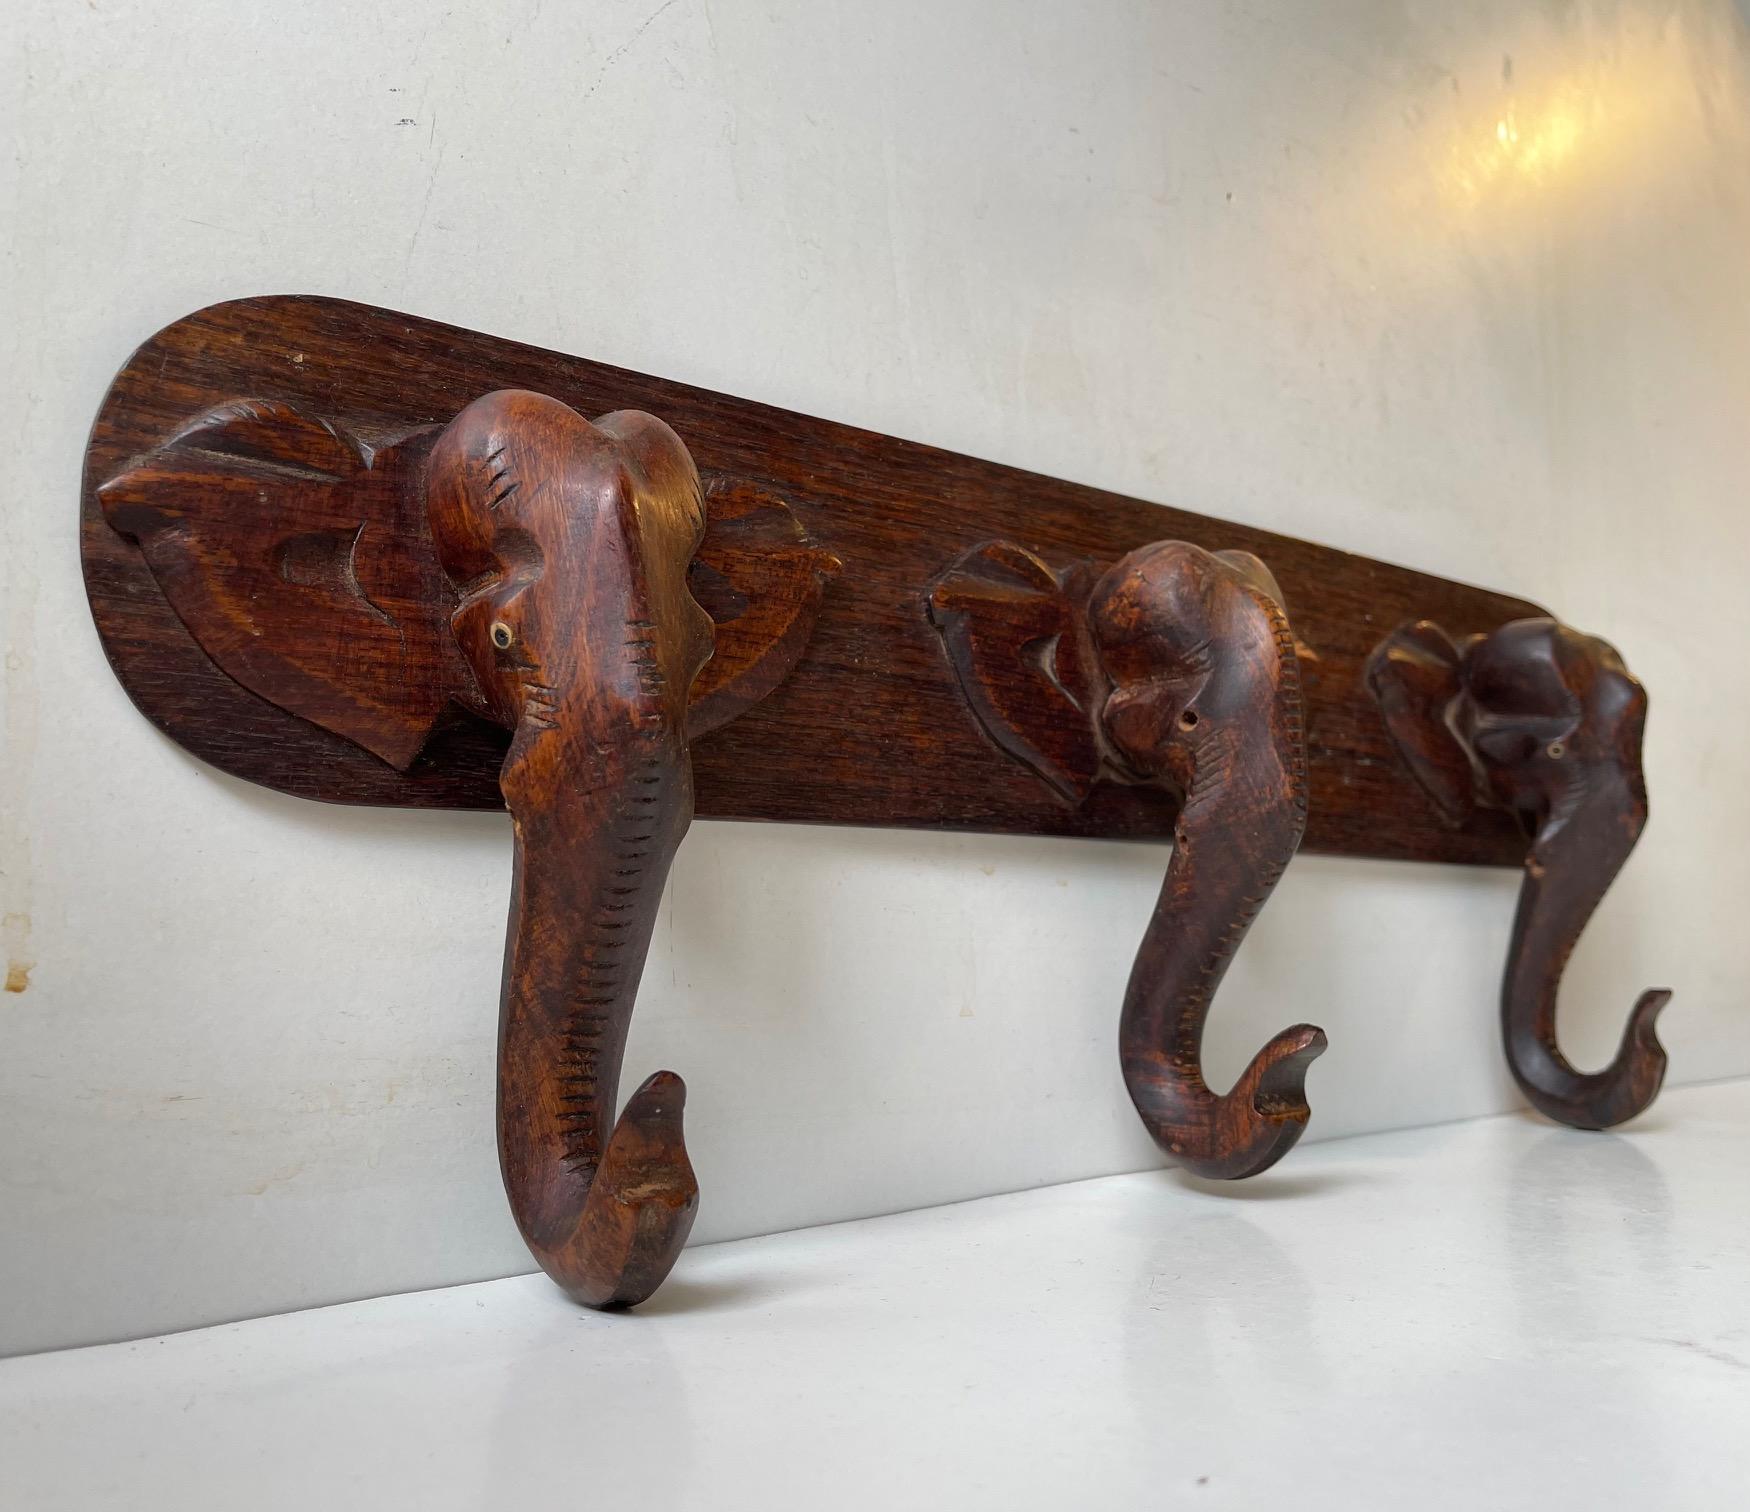 Hand-Carved Elephant Coat or Towel Rack in Dark Wood, 1930s For Sale 1